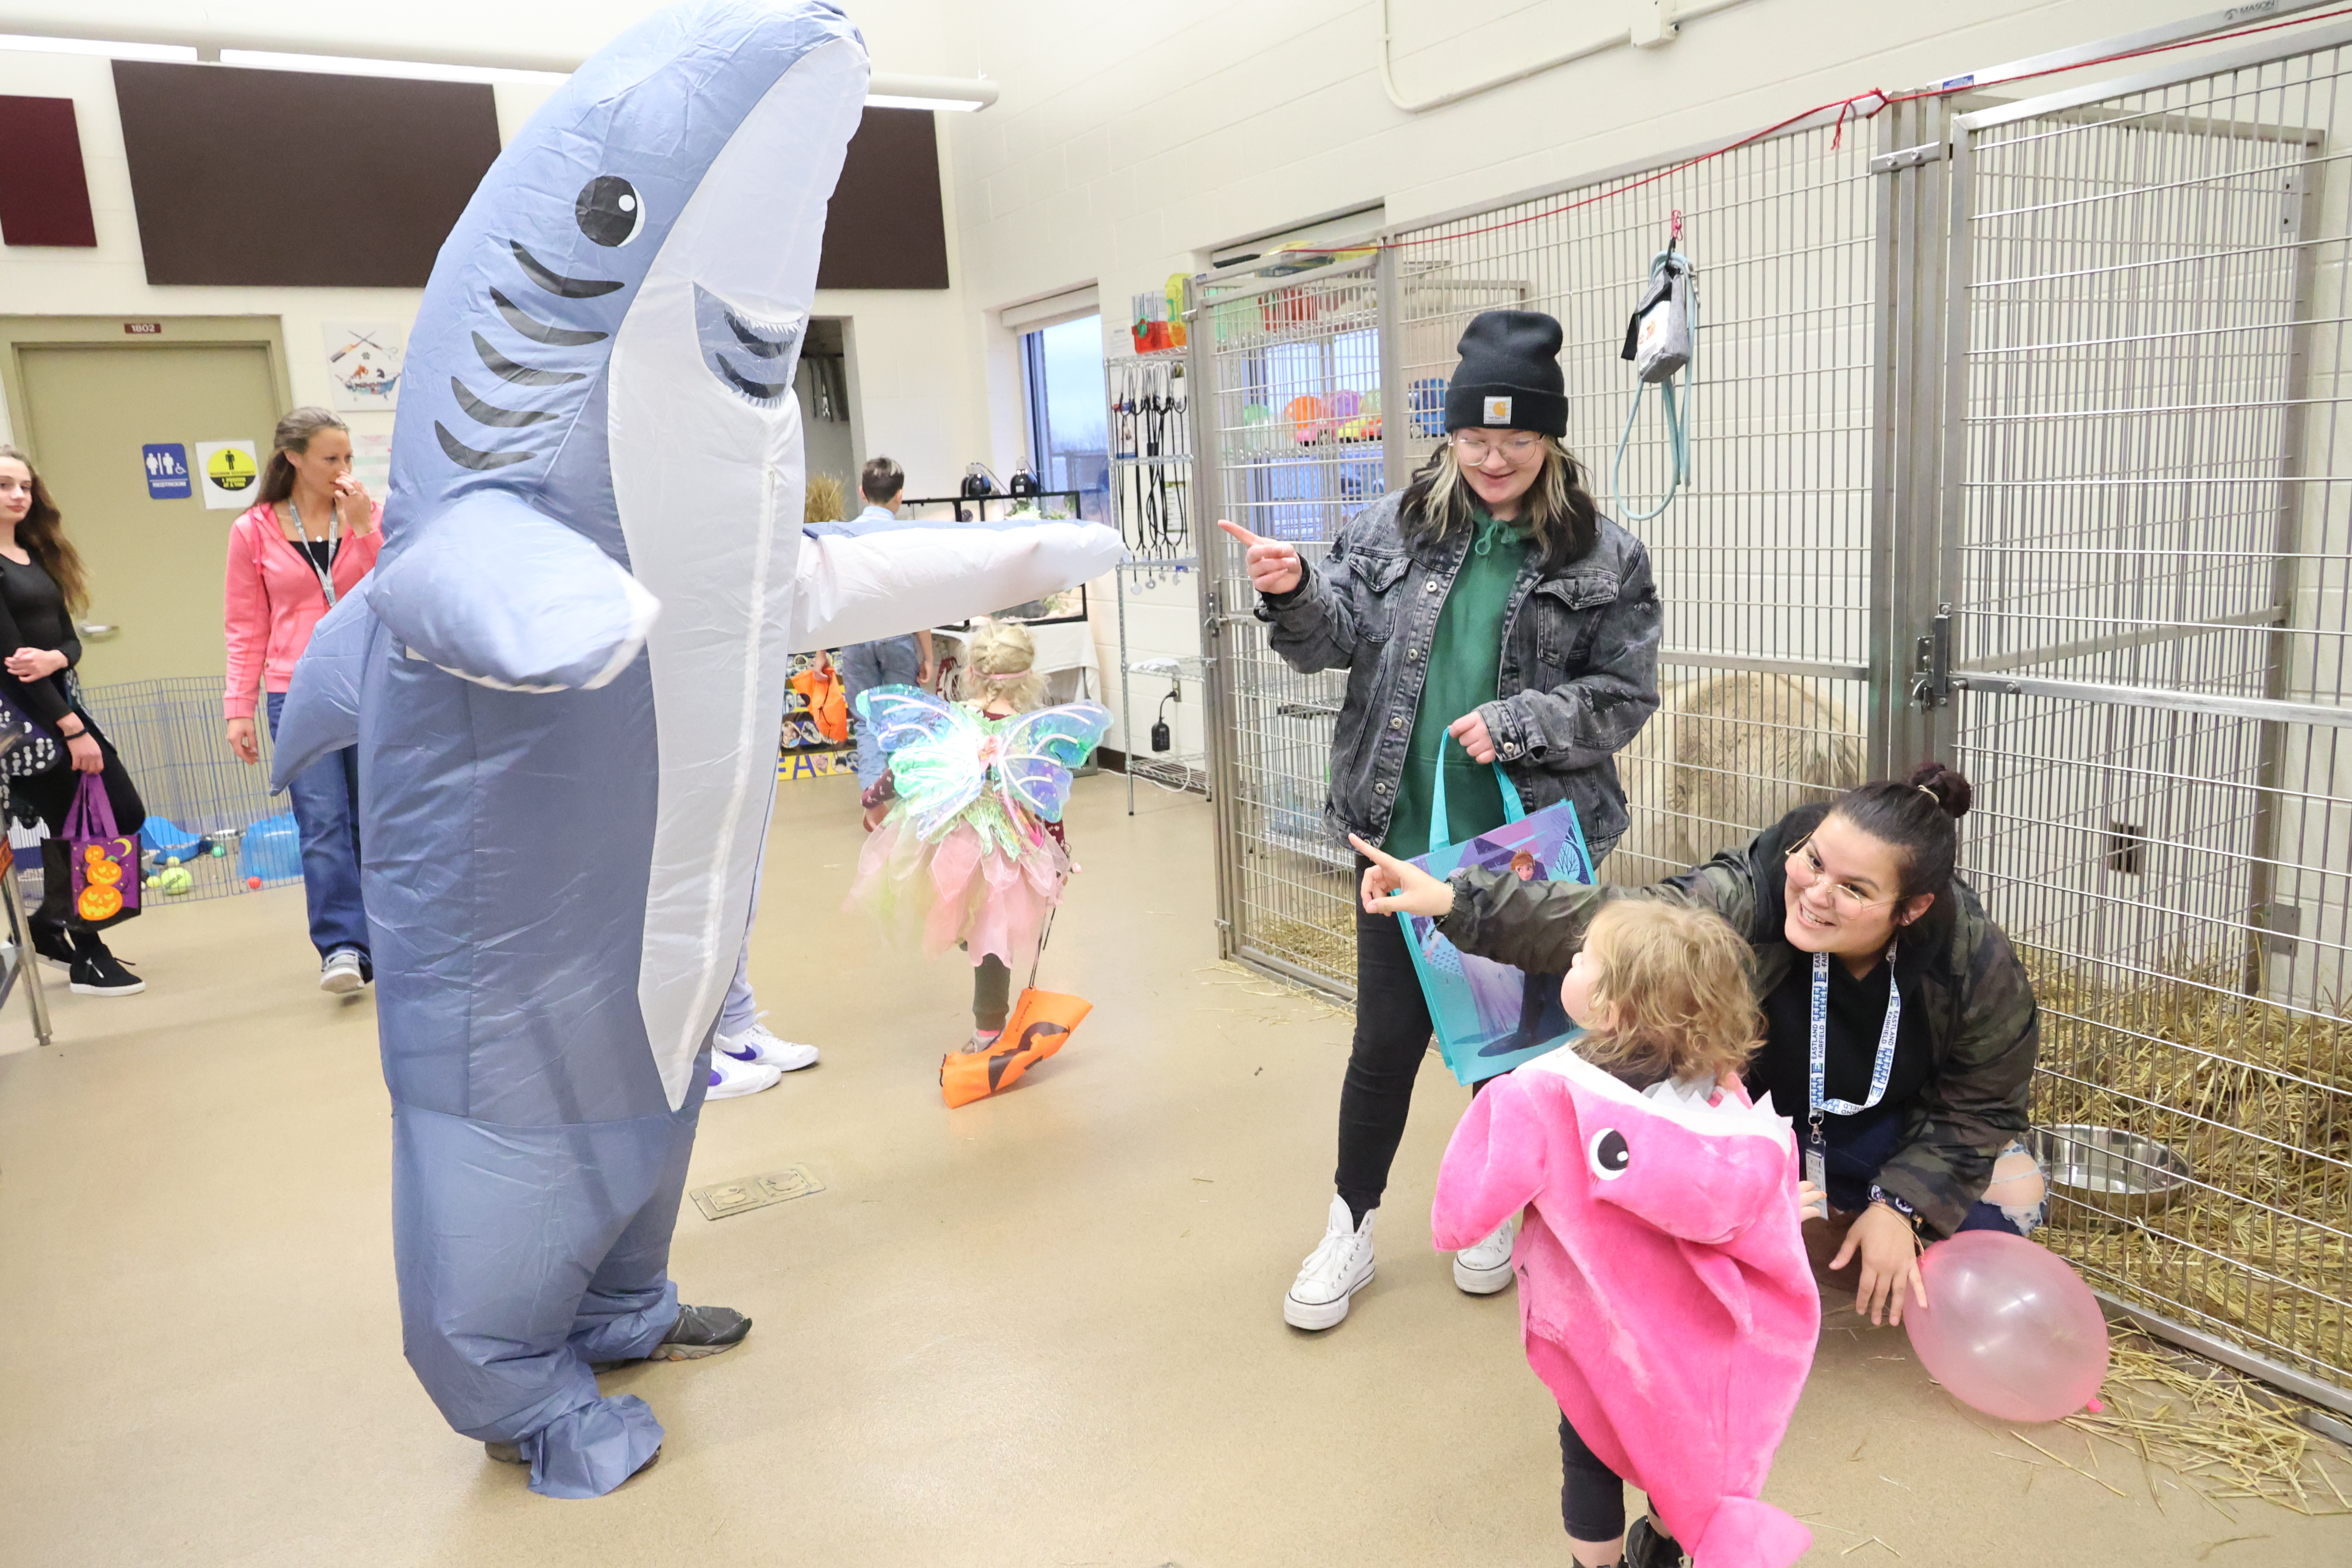 A person in a shark costume meets a young child in a baby shark costume!